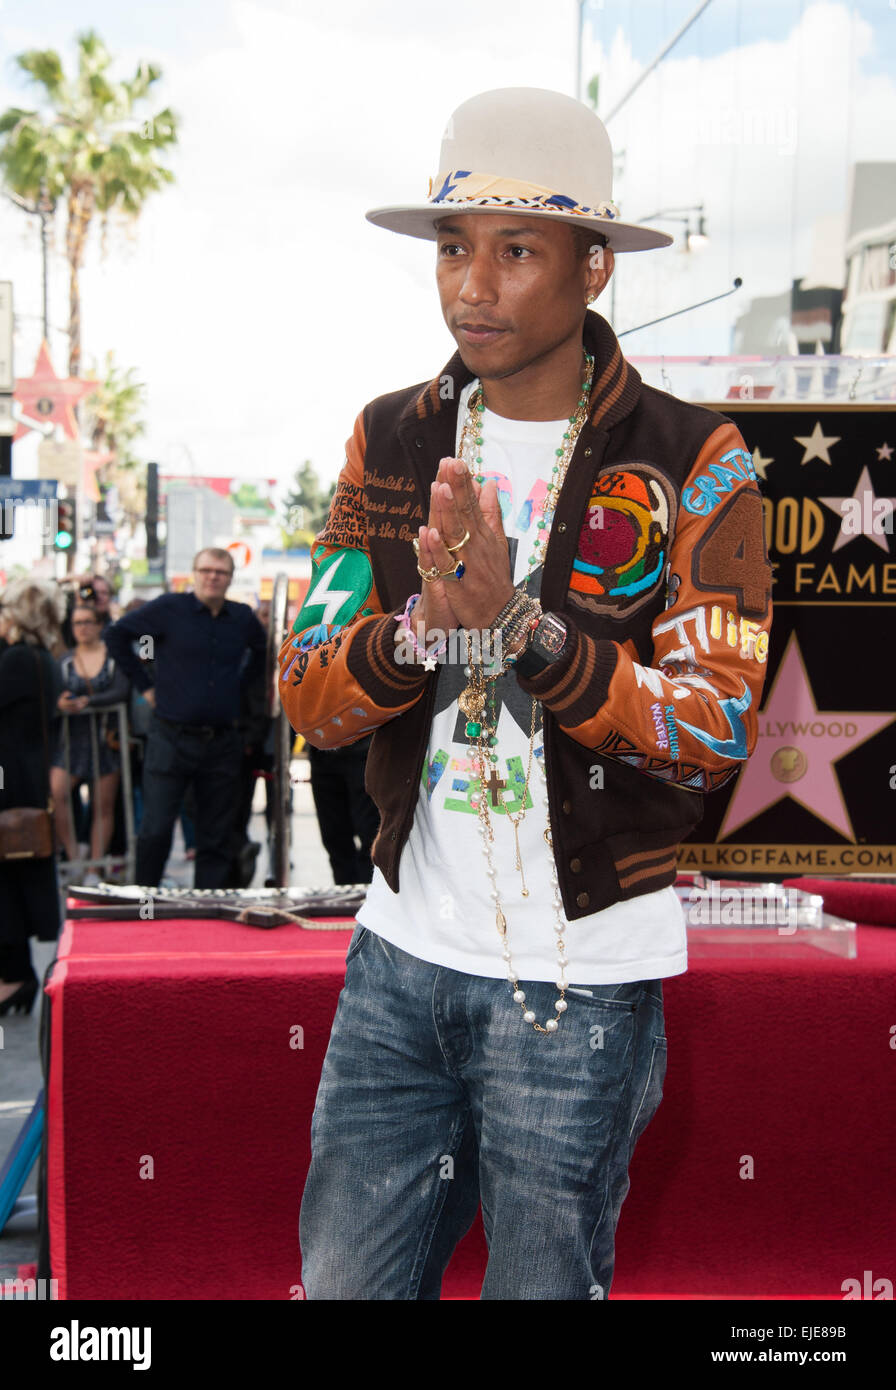 LOS ANGELES, CA - DECEMBER 4, 2014: Singer/songwriter Pharrell Williams on Hollywood Boulevard where he was honored with the 2,537th star on the Hollywood Walk of Fame. Stock Photo